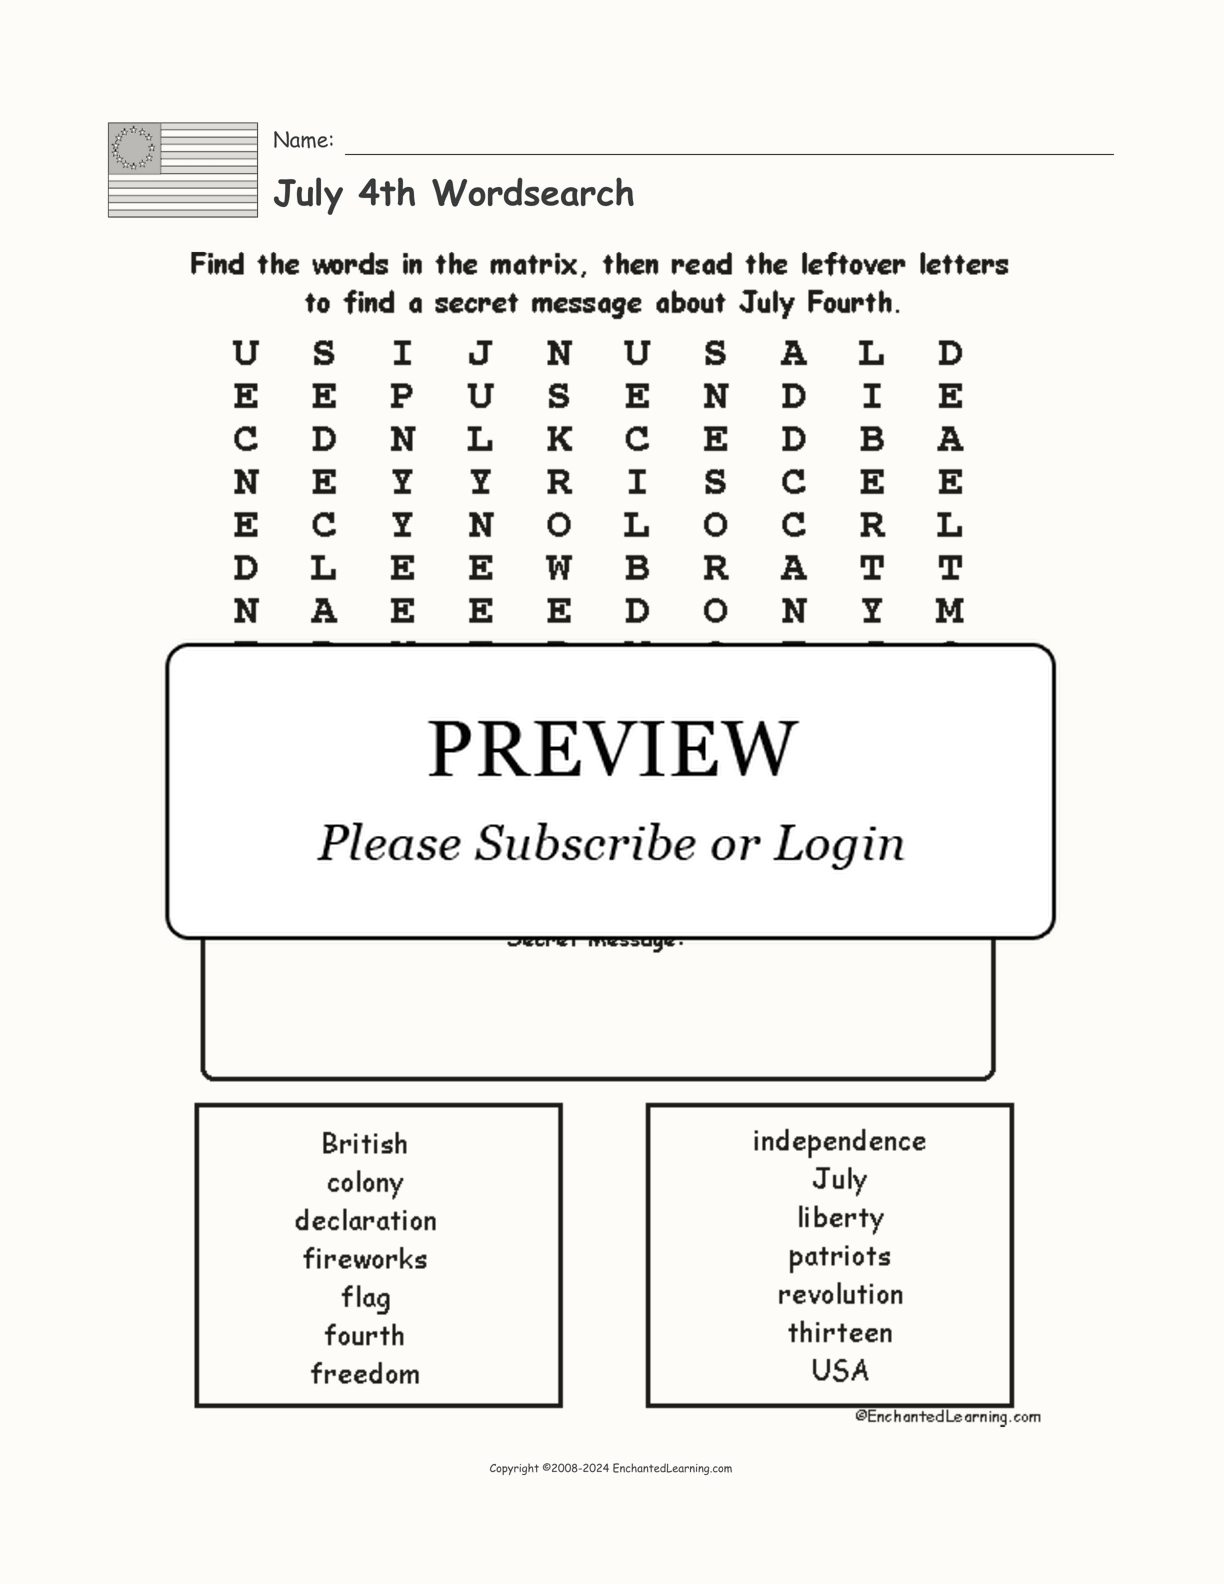 July 4th Wordsearch interactive worksheet page 1